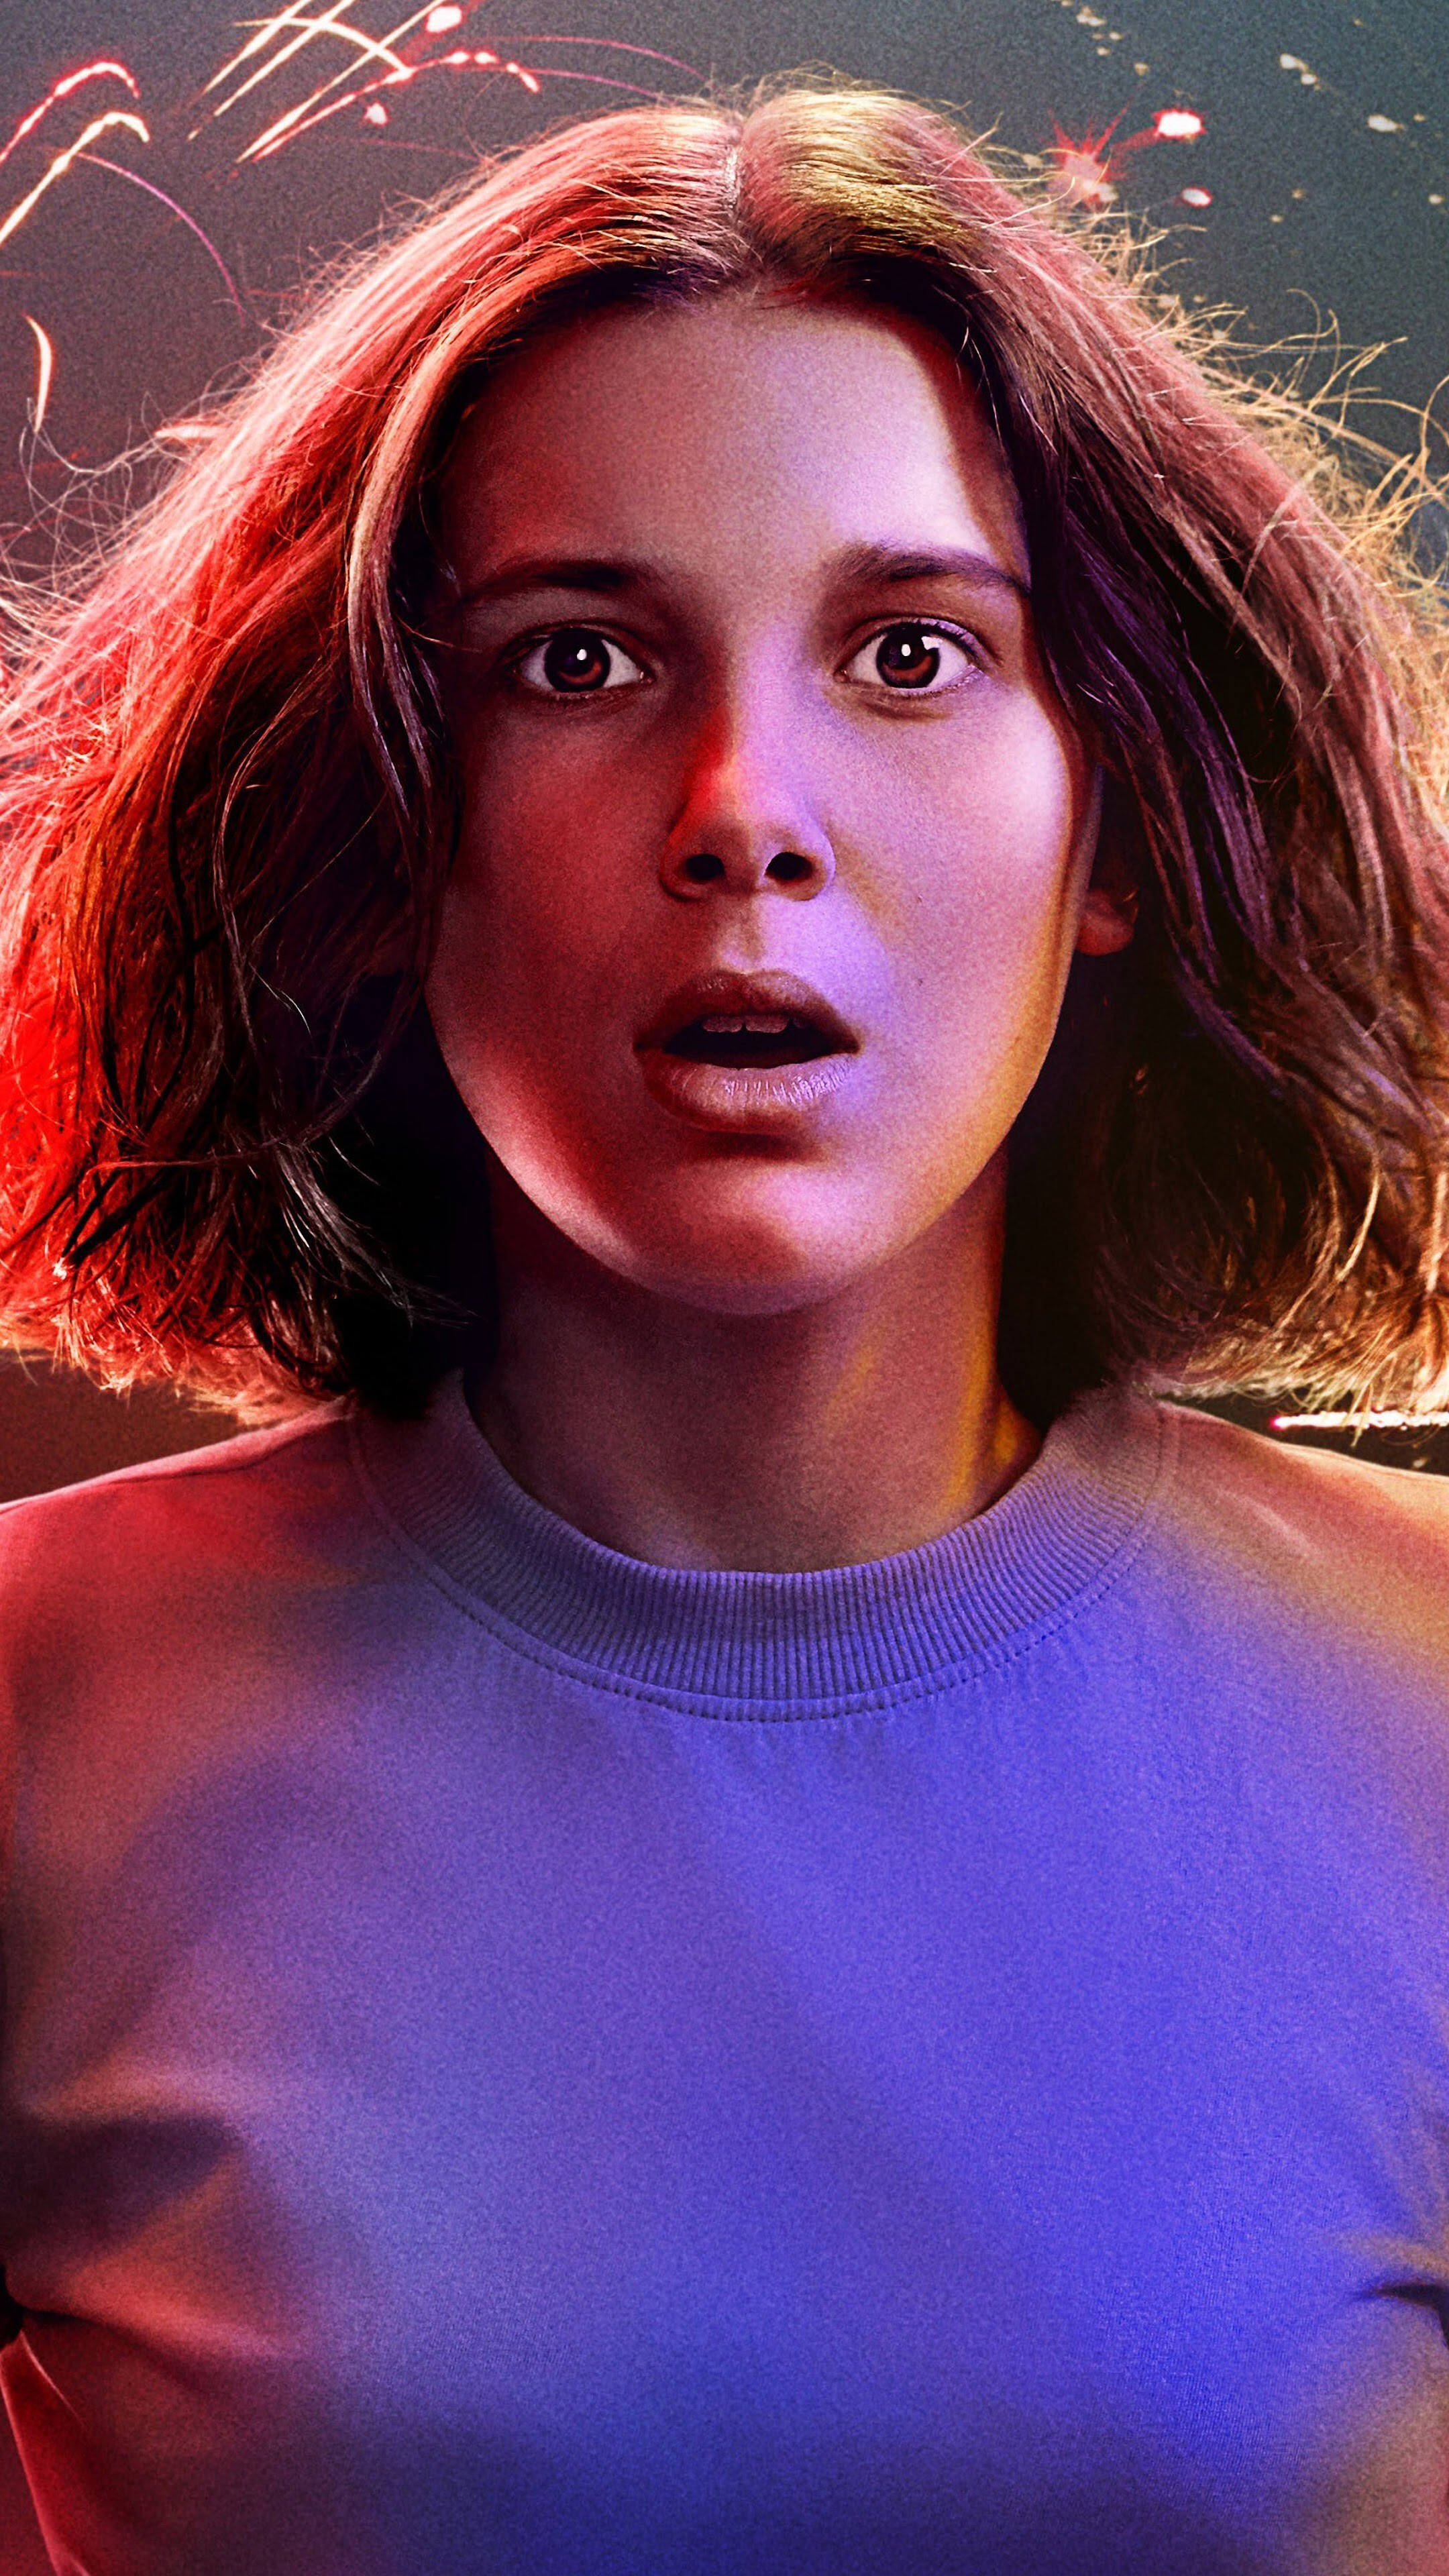 Stranger Things: Season 3, Eleven, portrayed by Millie Bobby Brown. 2160x3840 4K Wallpaper.